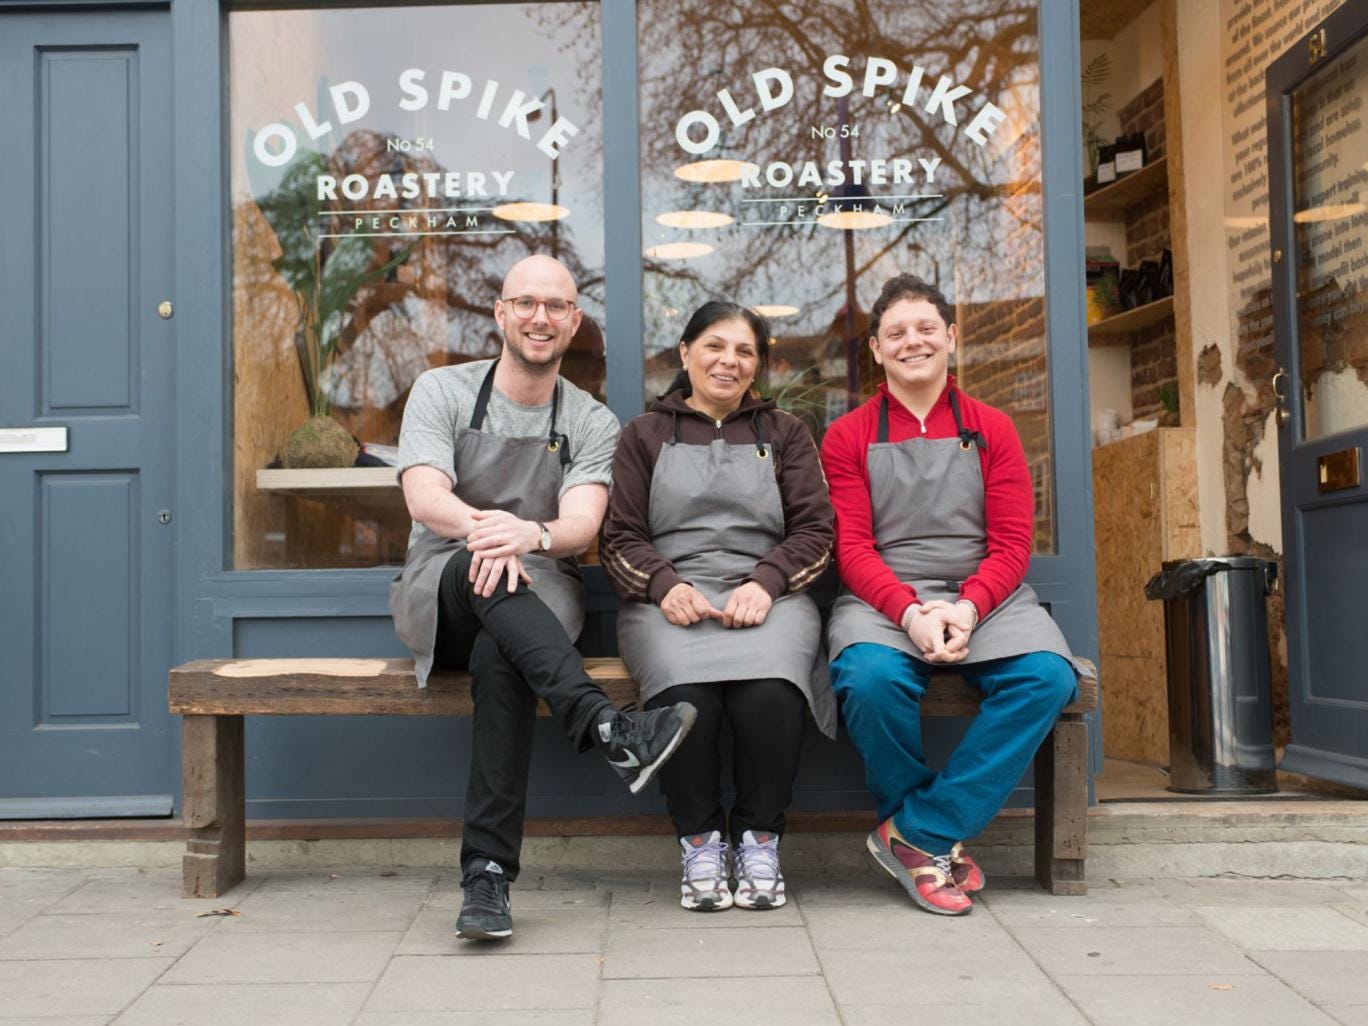 The Old Spike Roastery: The London Coffee Roasting Company Providing Housing and an Income to the Homeless!